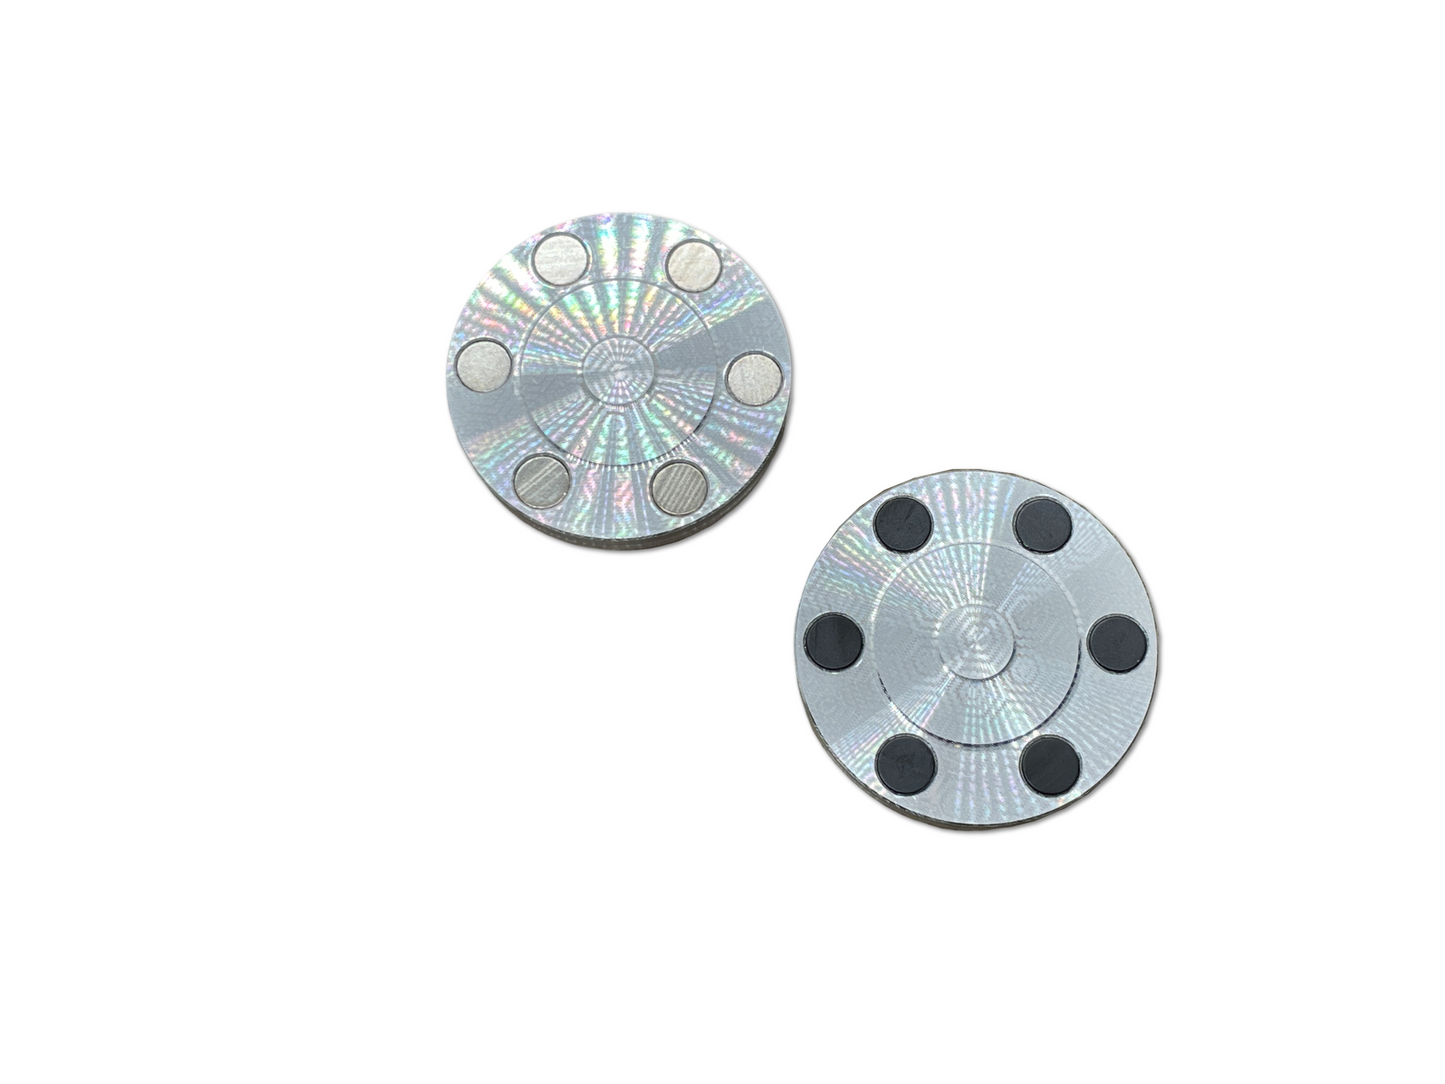 GROOVED Aluminum CLICKY Haptic Coins Fidget